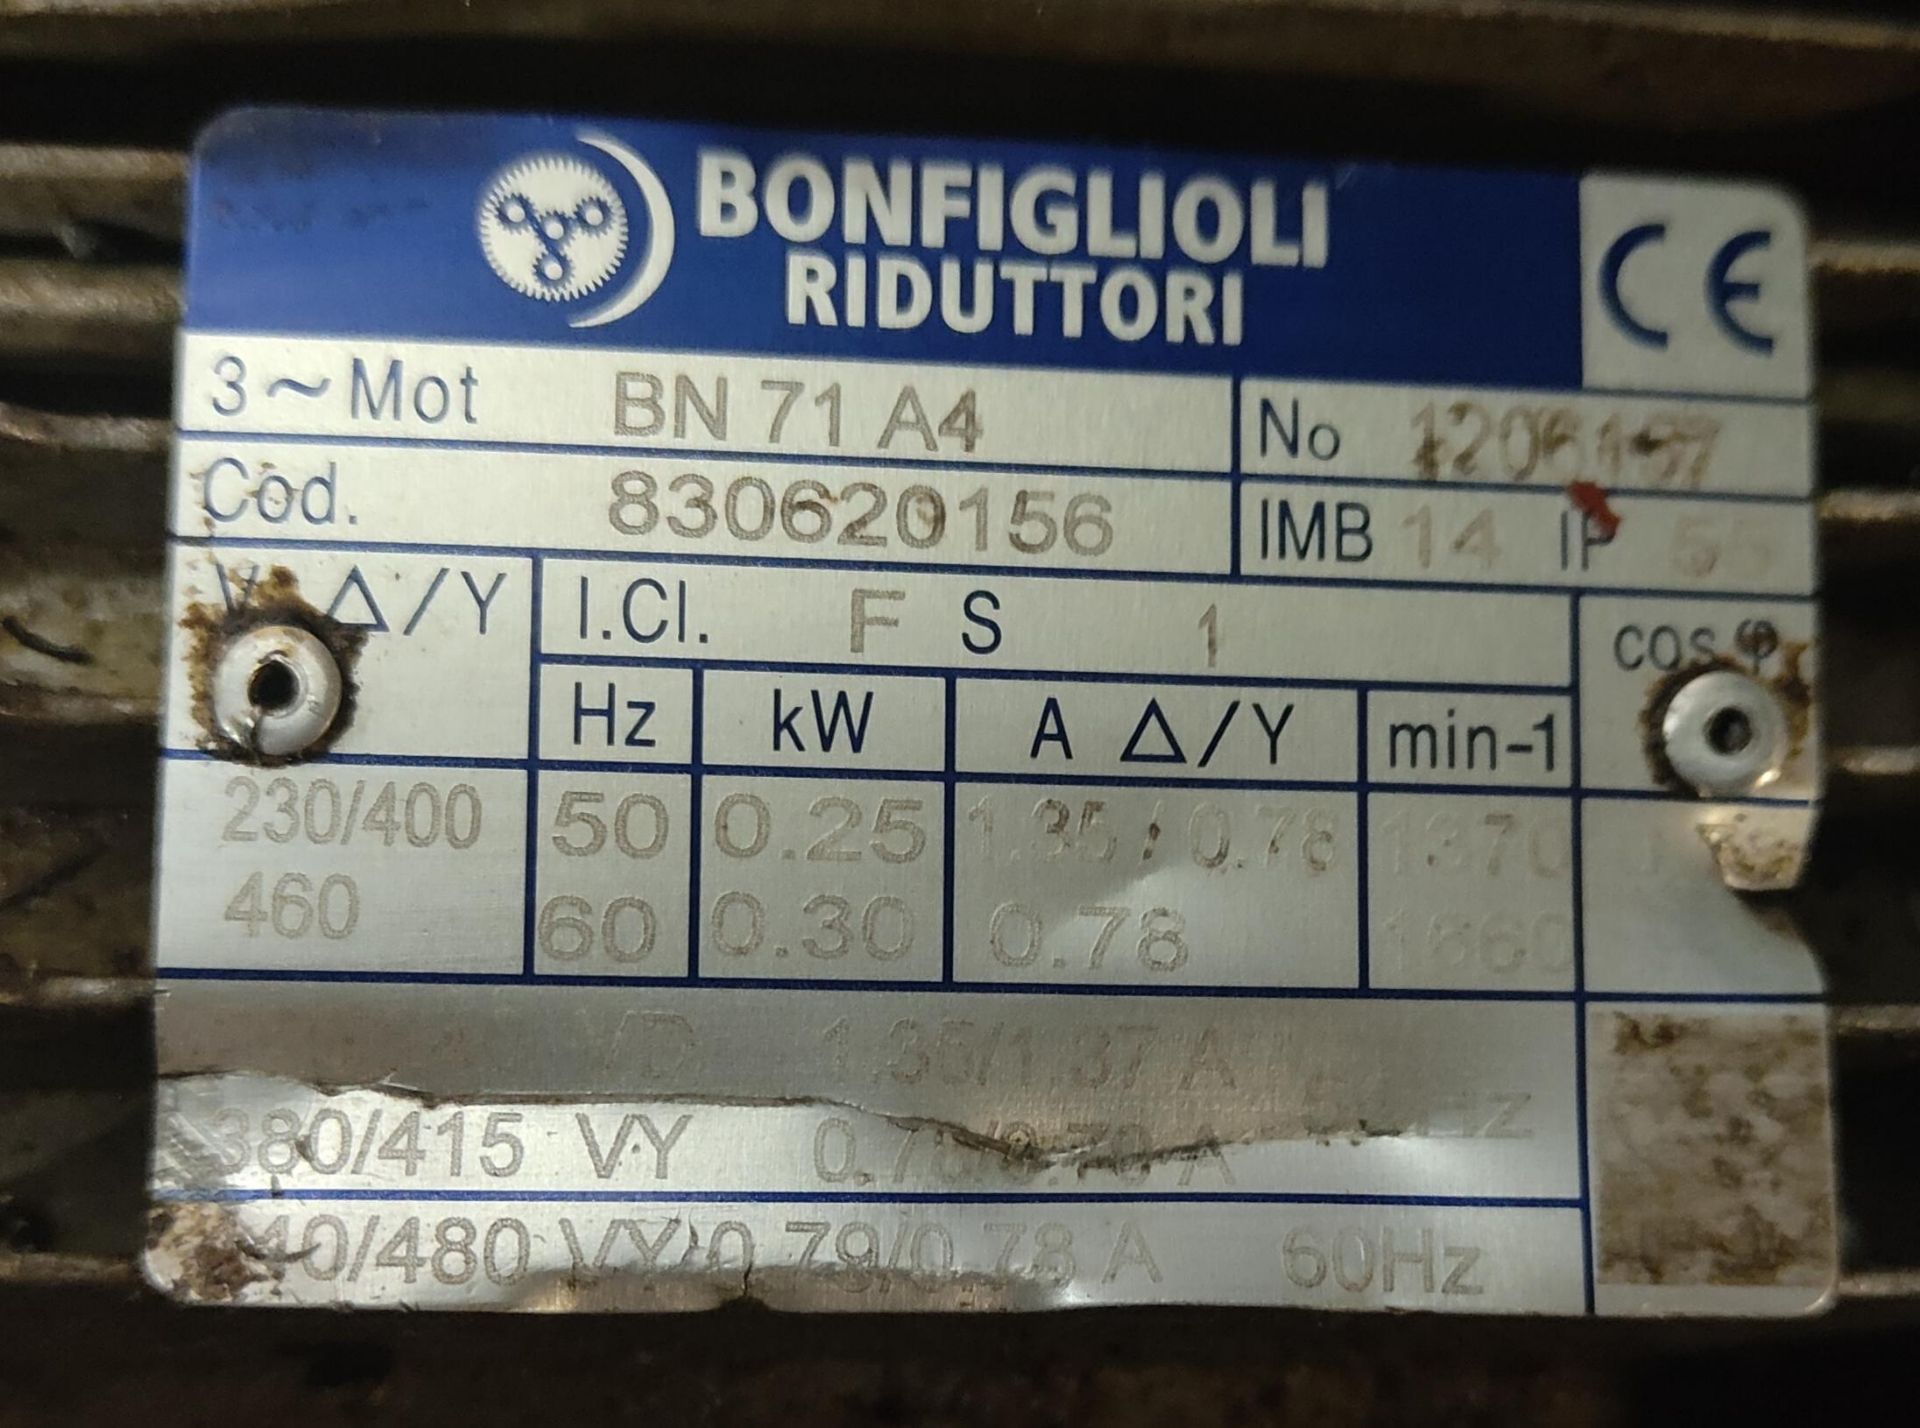 Bonfiglioli BN 71 A4 Electric Motor, serial no. 1206157, loading free of charge - yes (vendors - Image 2 of 2